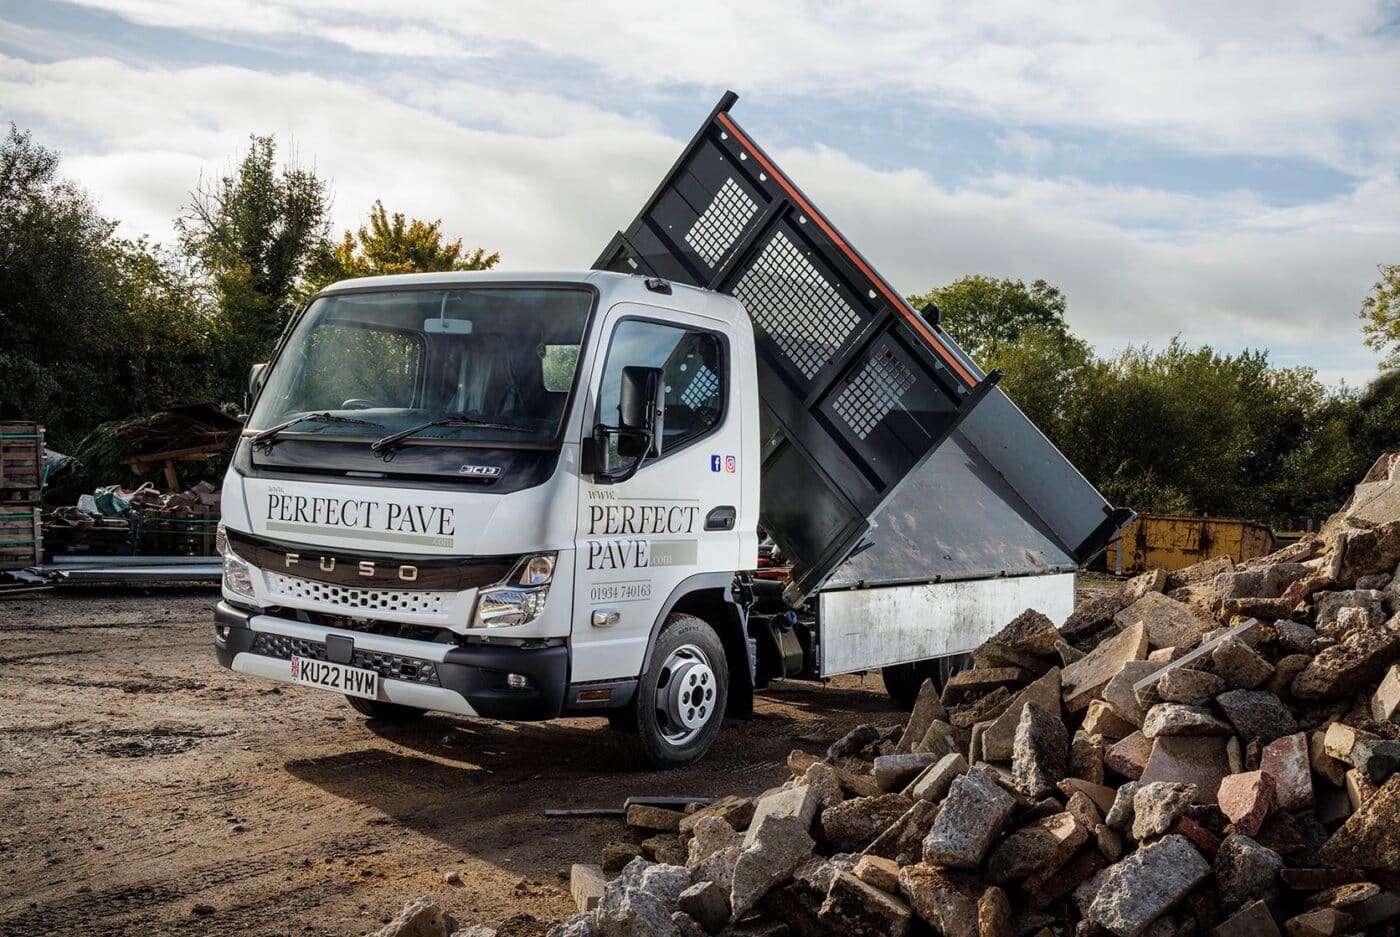 “A no-nonsense workhorse, that’s what we need and that’s what we get with the FUSO Canter.” So says Alex Howley, whose Somerset company Perfect Pave has just commissioned its first vehicle from the all-new Canter range.